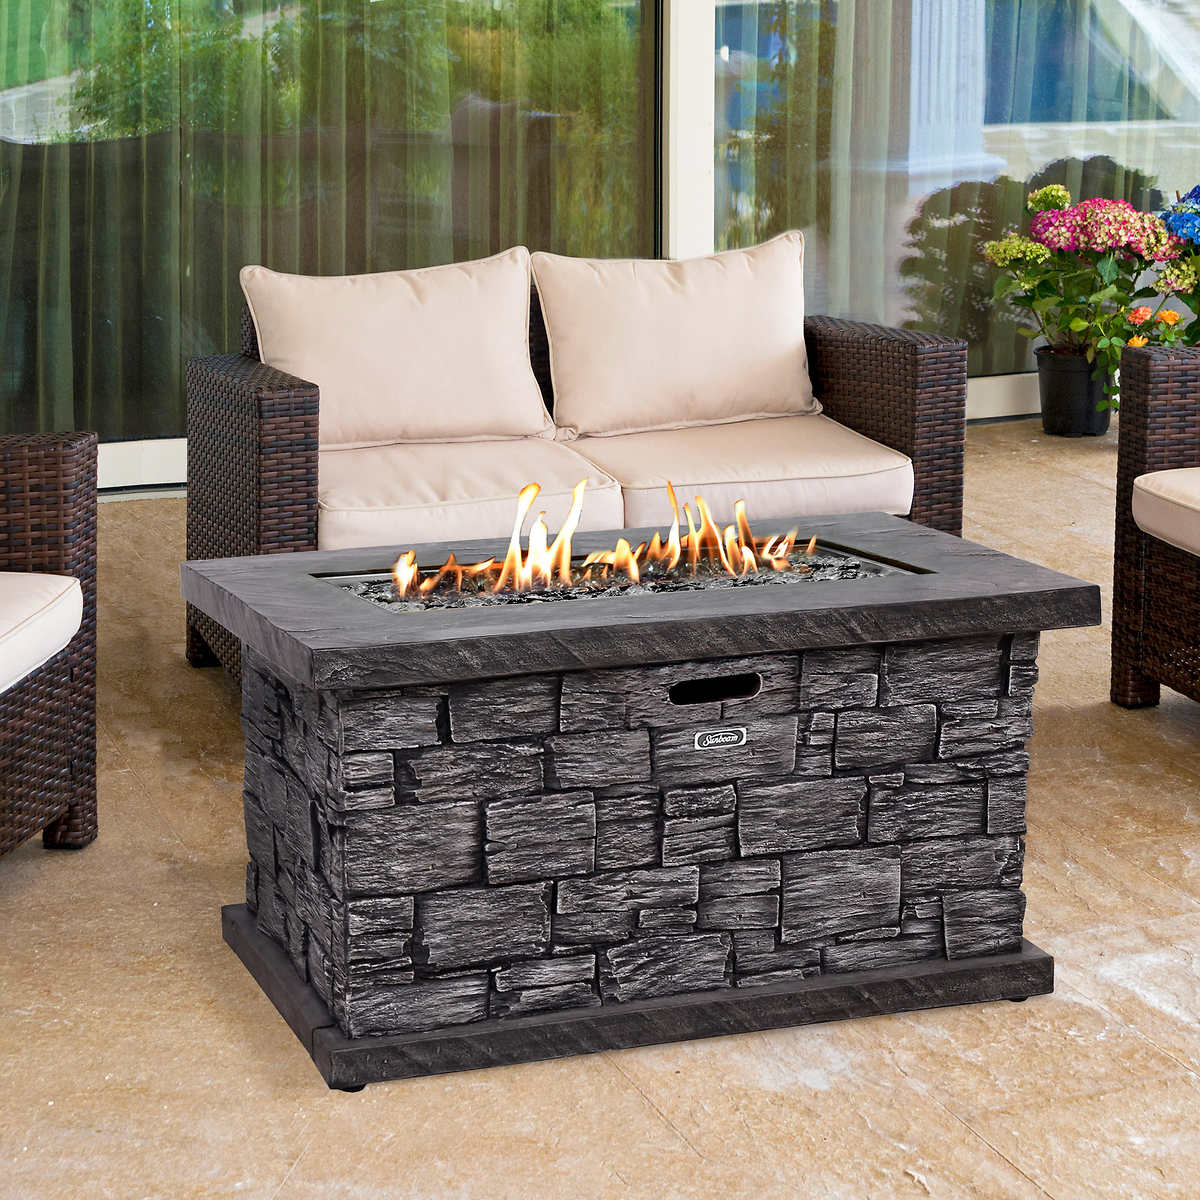 Sunbeam Faux Stone Fire Table Costco, Heat Resistant Stone For Fire Pit